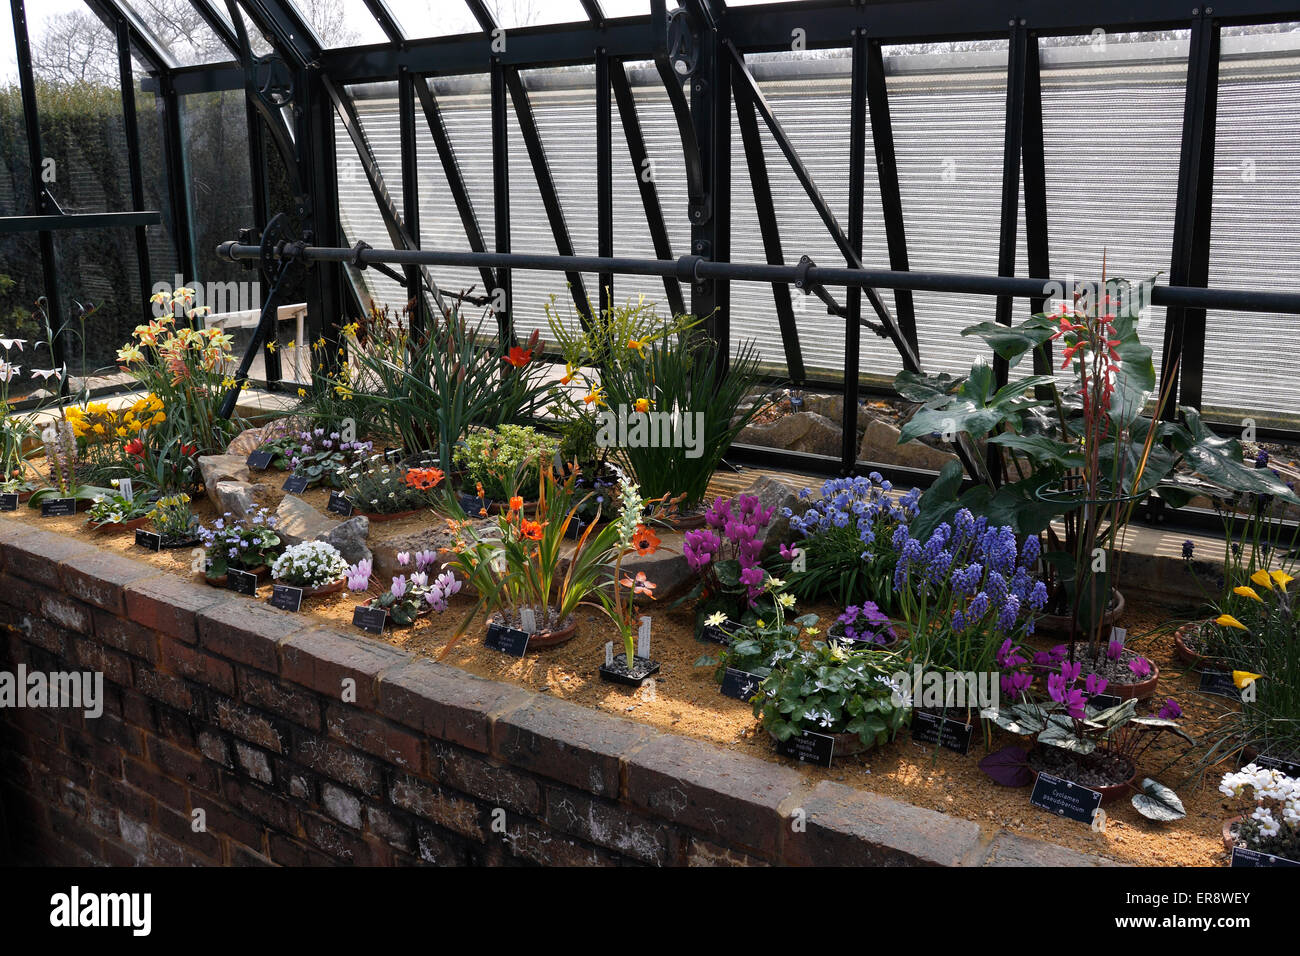 RHS WISLEY THE ALPINE HOUSE RAISED BEDS Stock Photo